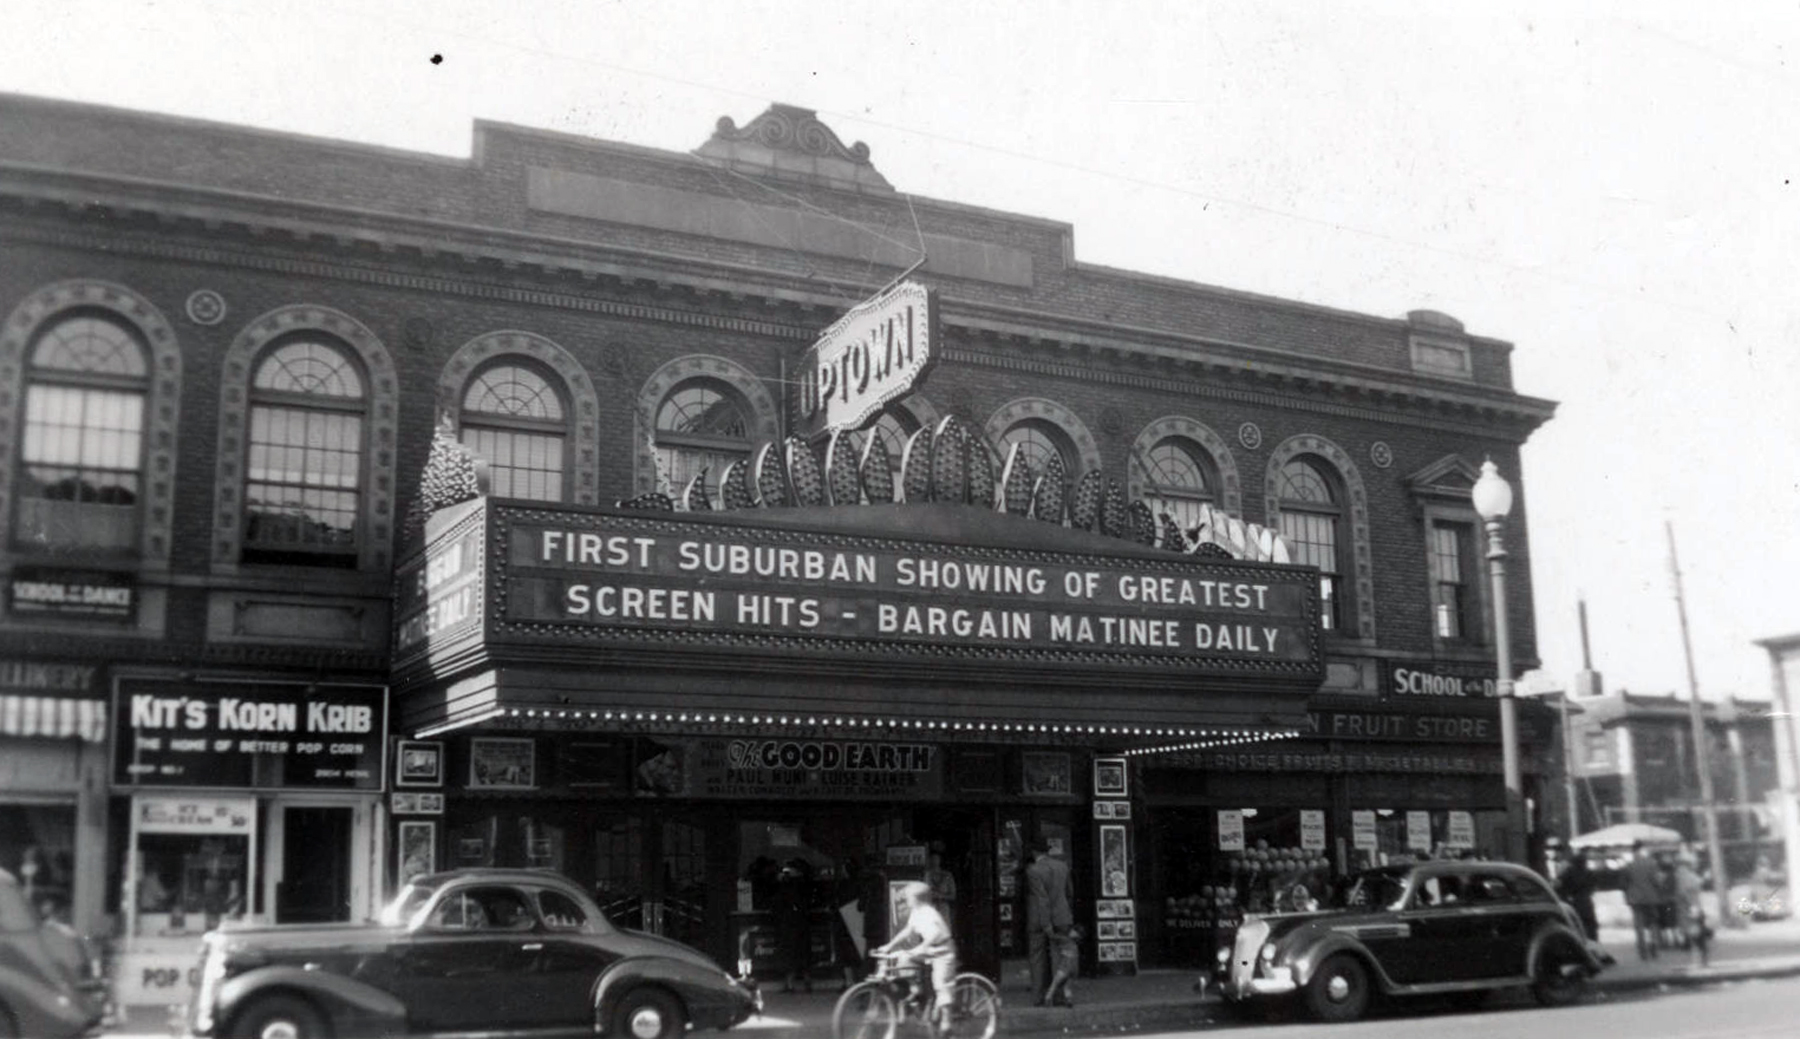 The Uptown Theatre prior to its renovation in approximately 1937.